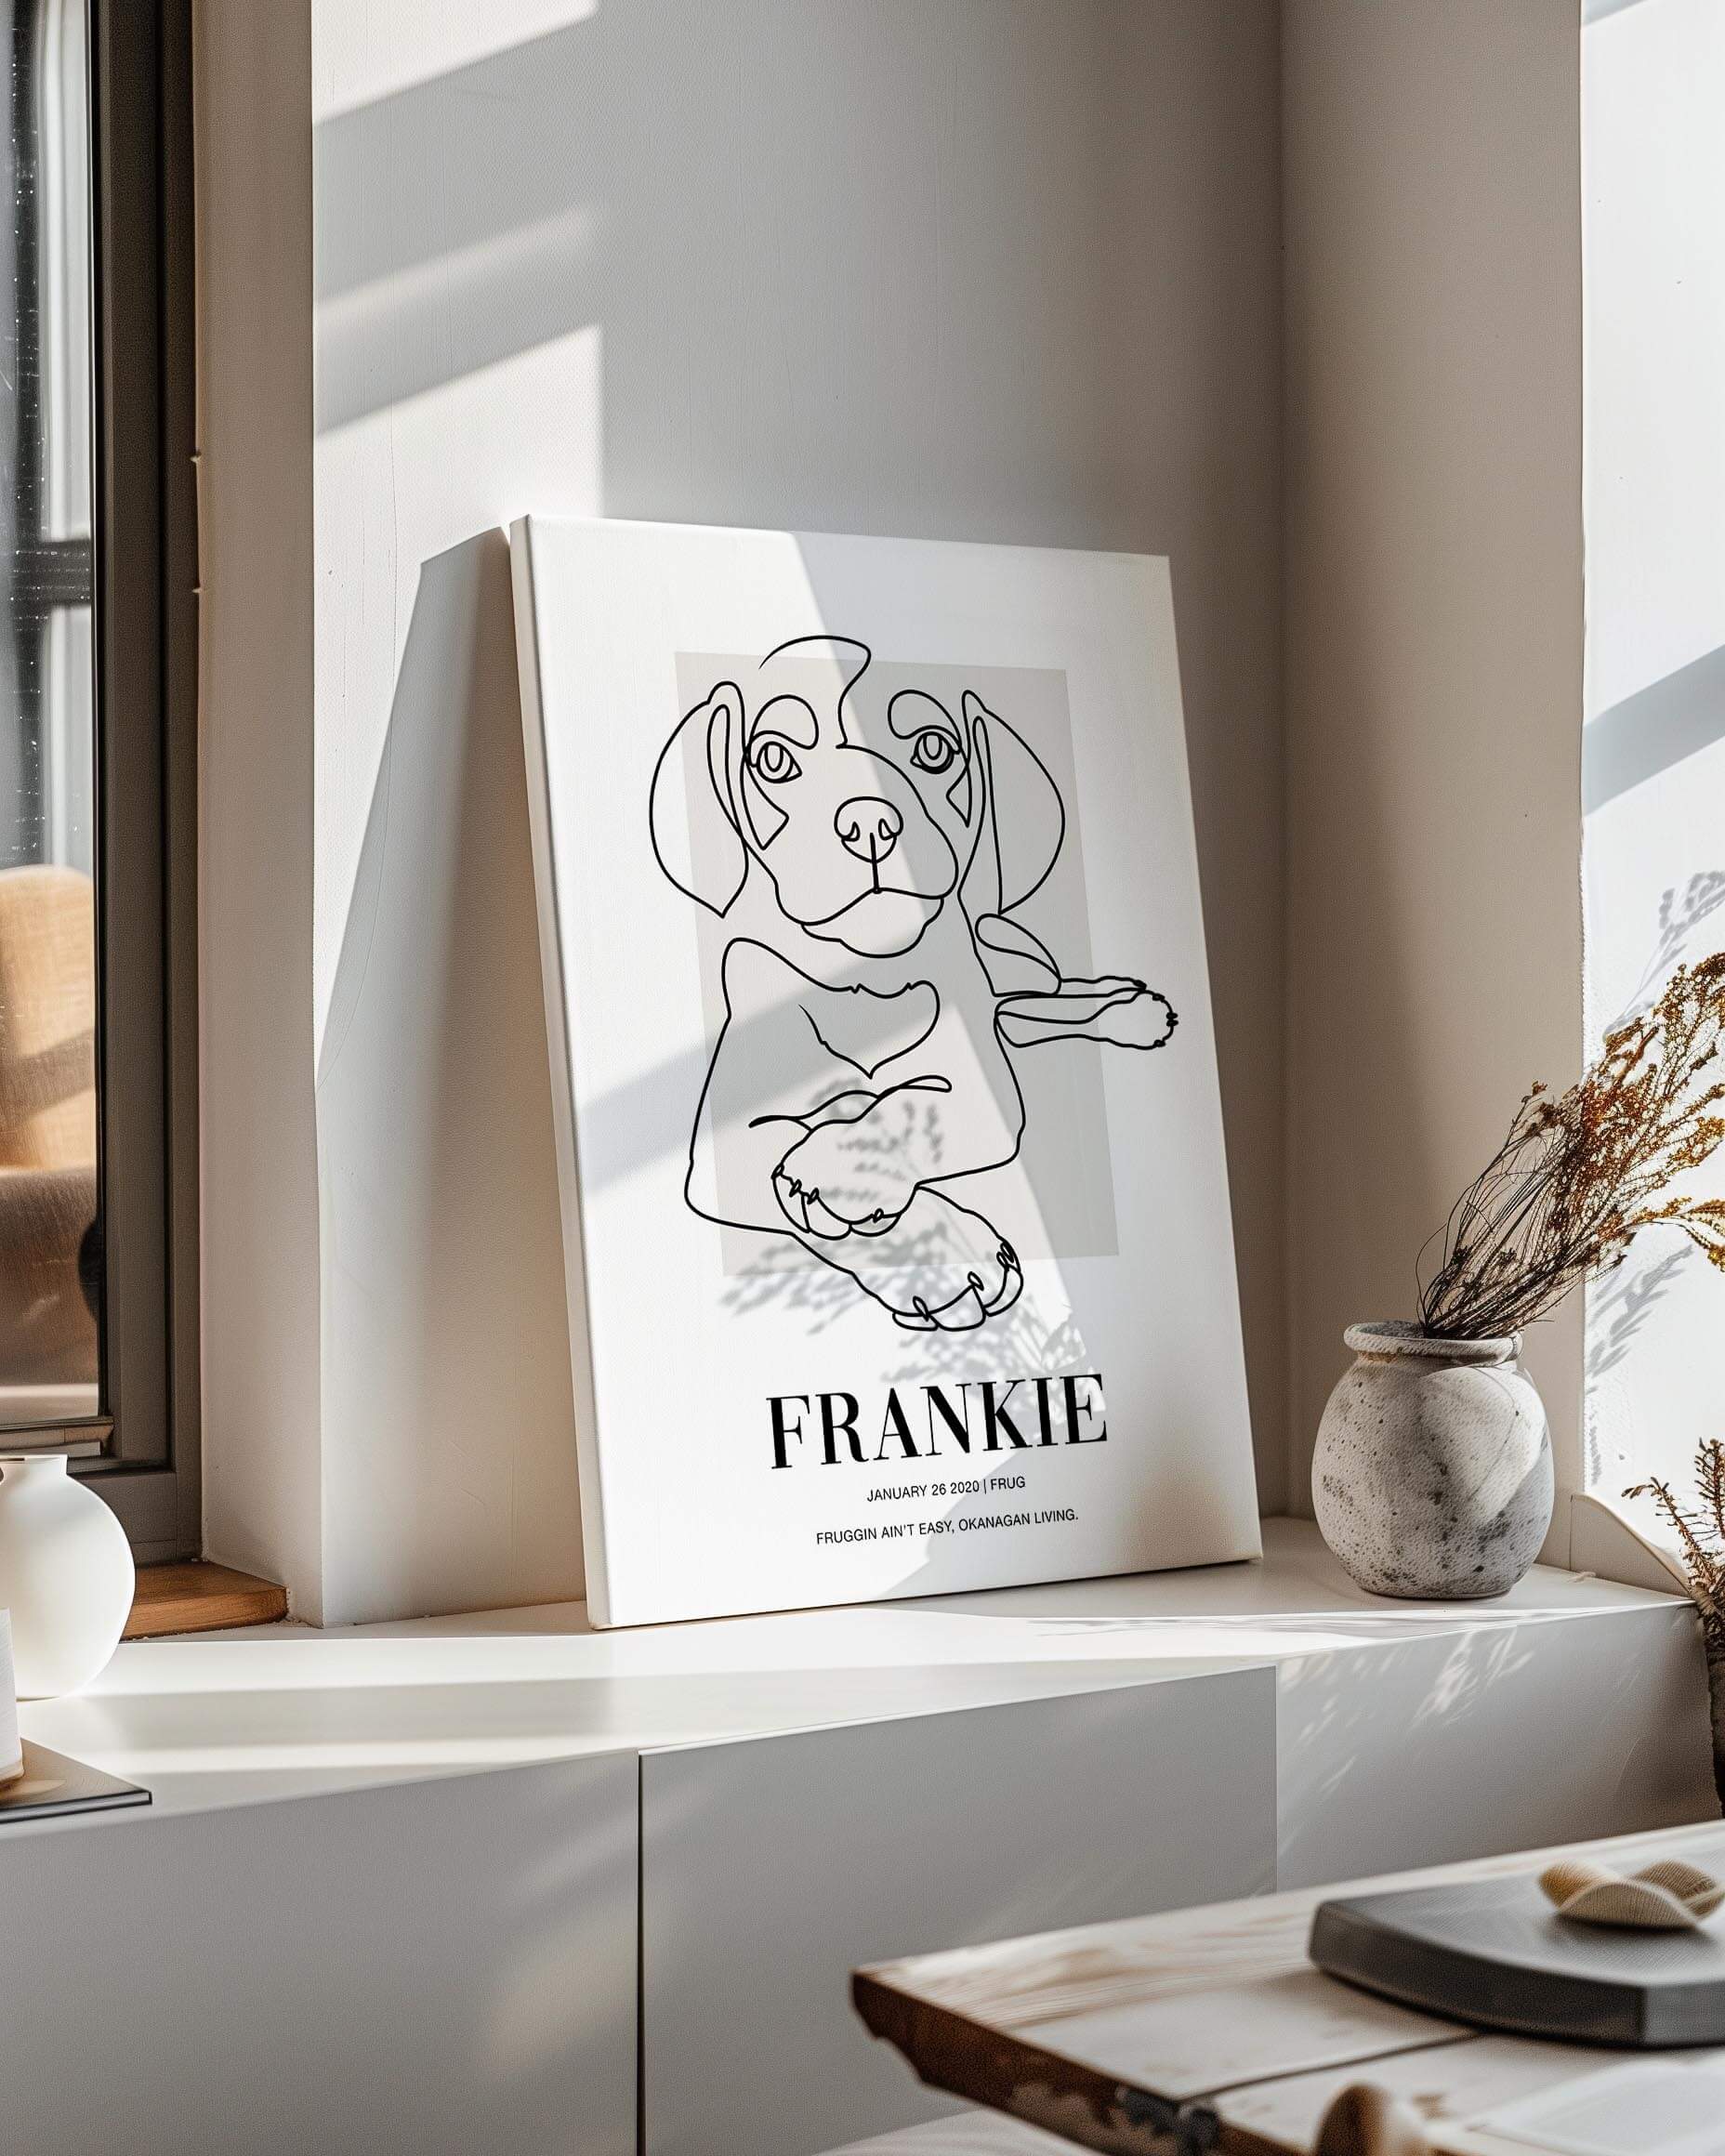 custom line drawn dog portrait printed on canvas and mounted in a unique home decor as a gift for a dog mom or dog dad pet parent made by vogue paws who specialize in personalized pet portrait gifts